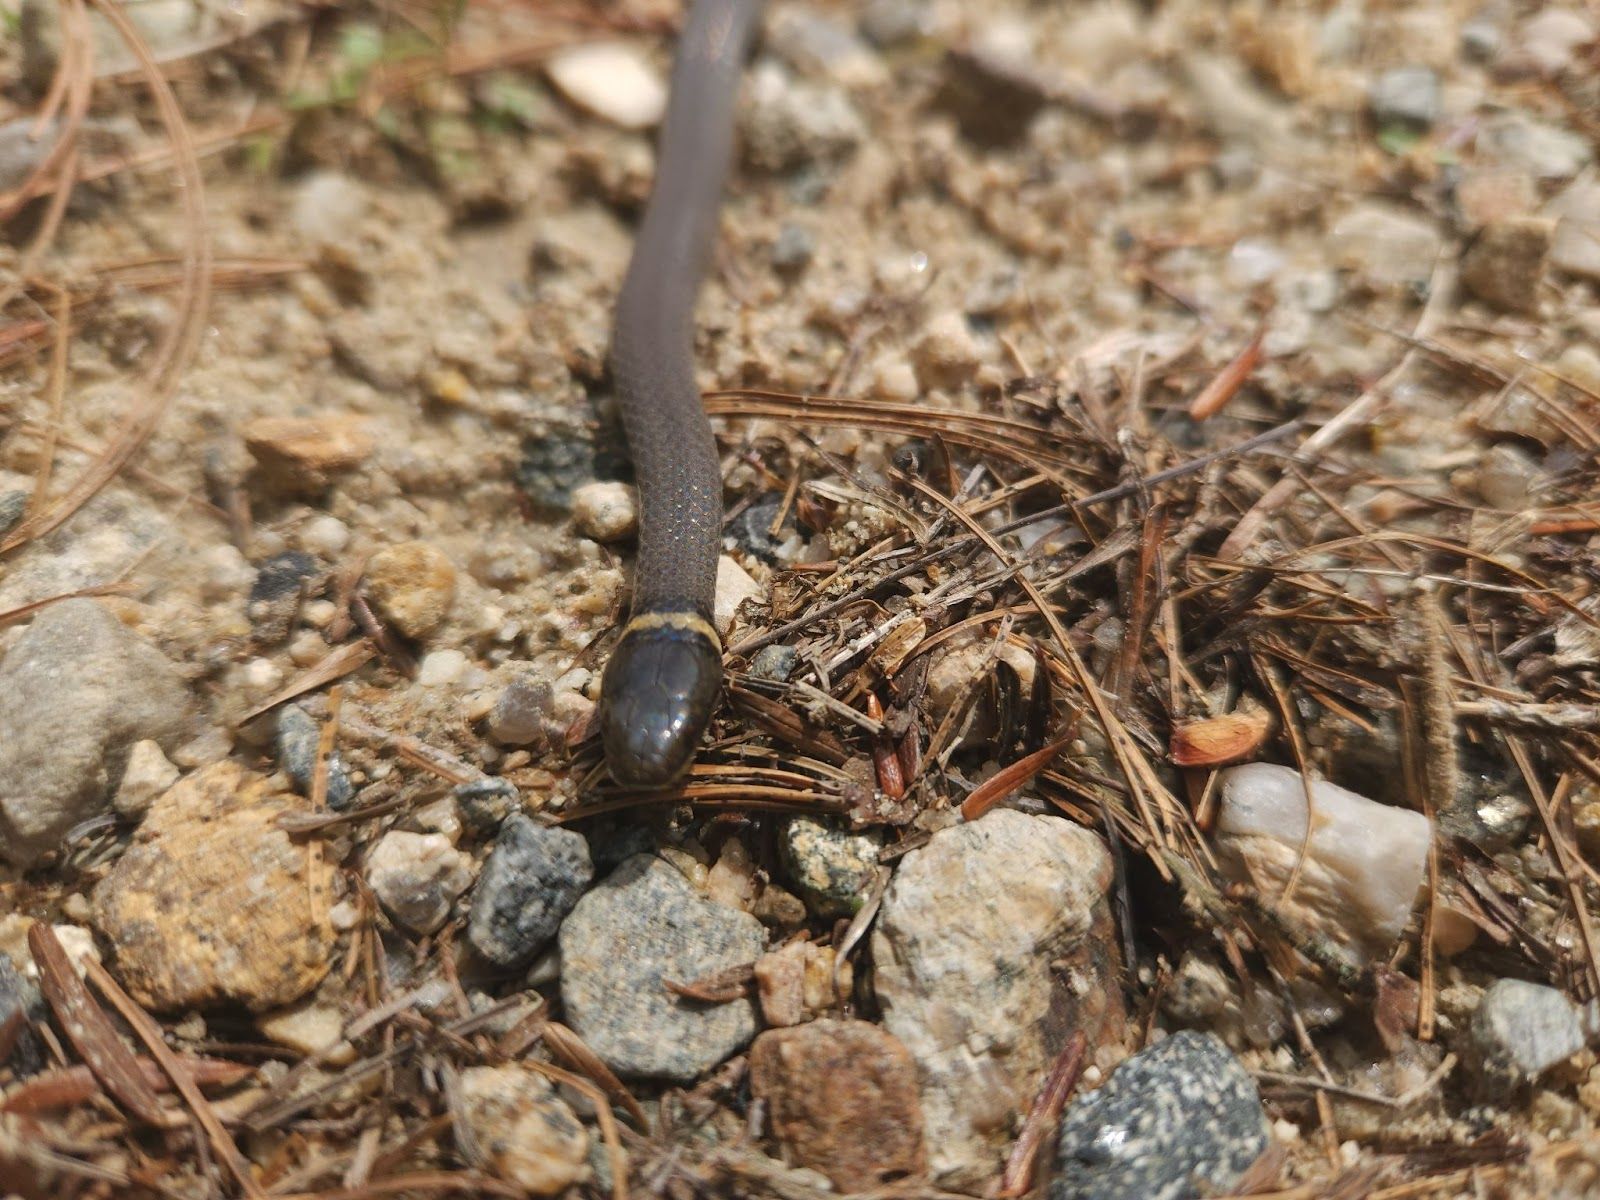 A ringneck snakes moves across the ground.